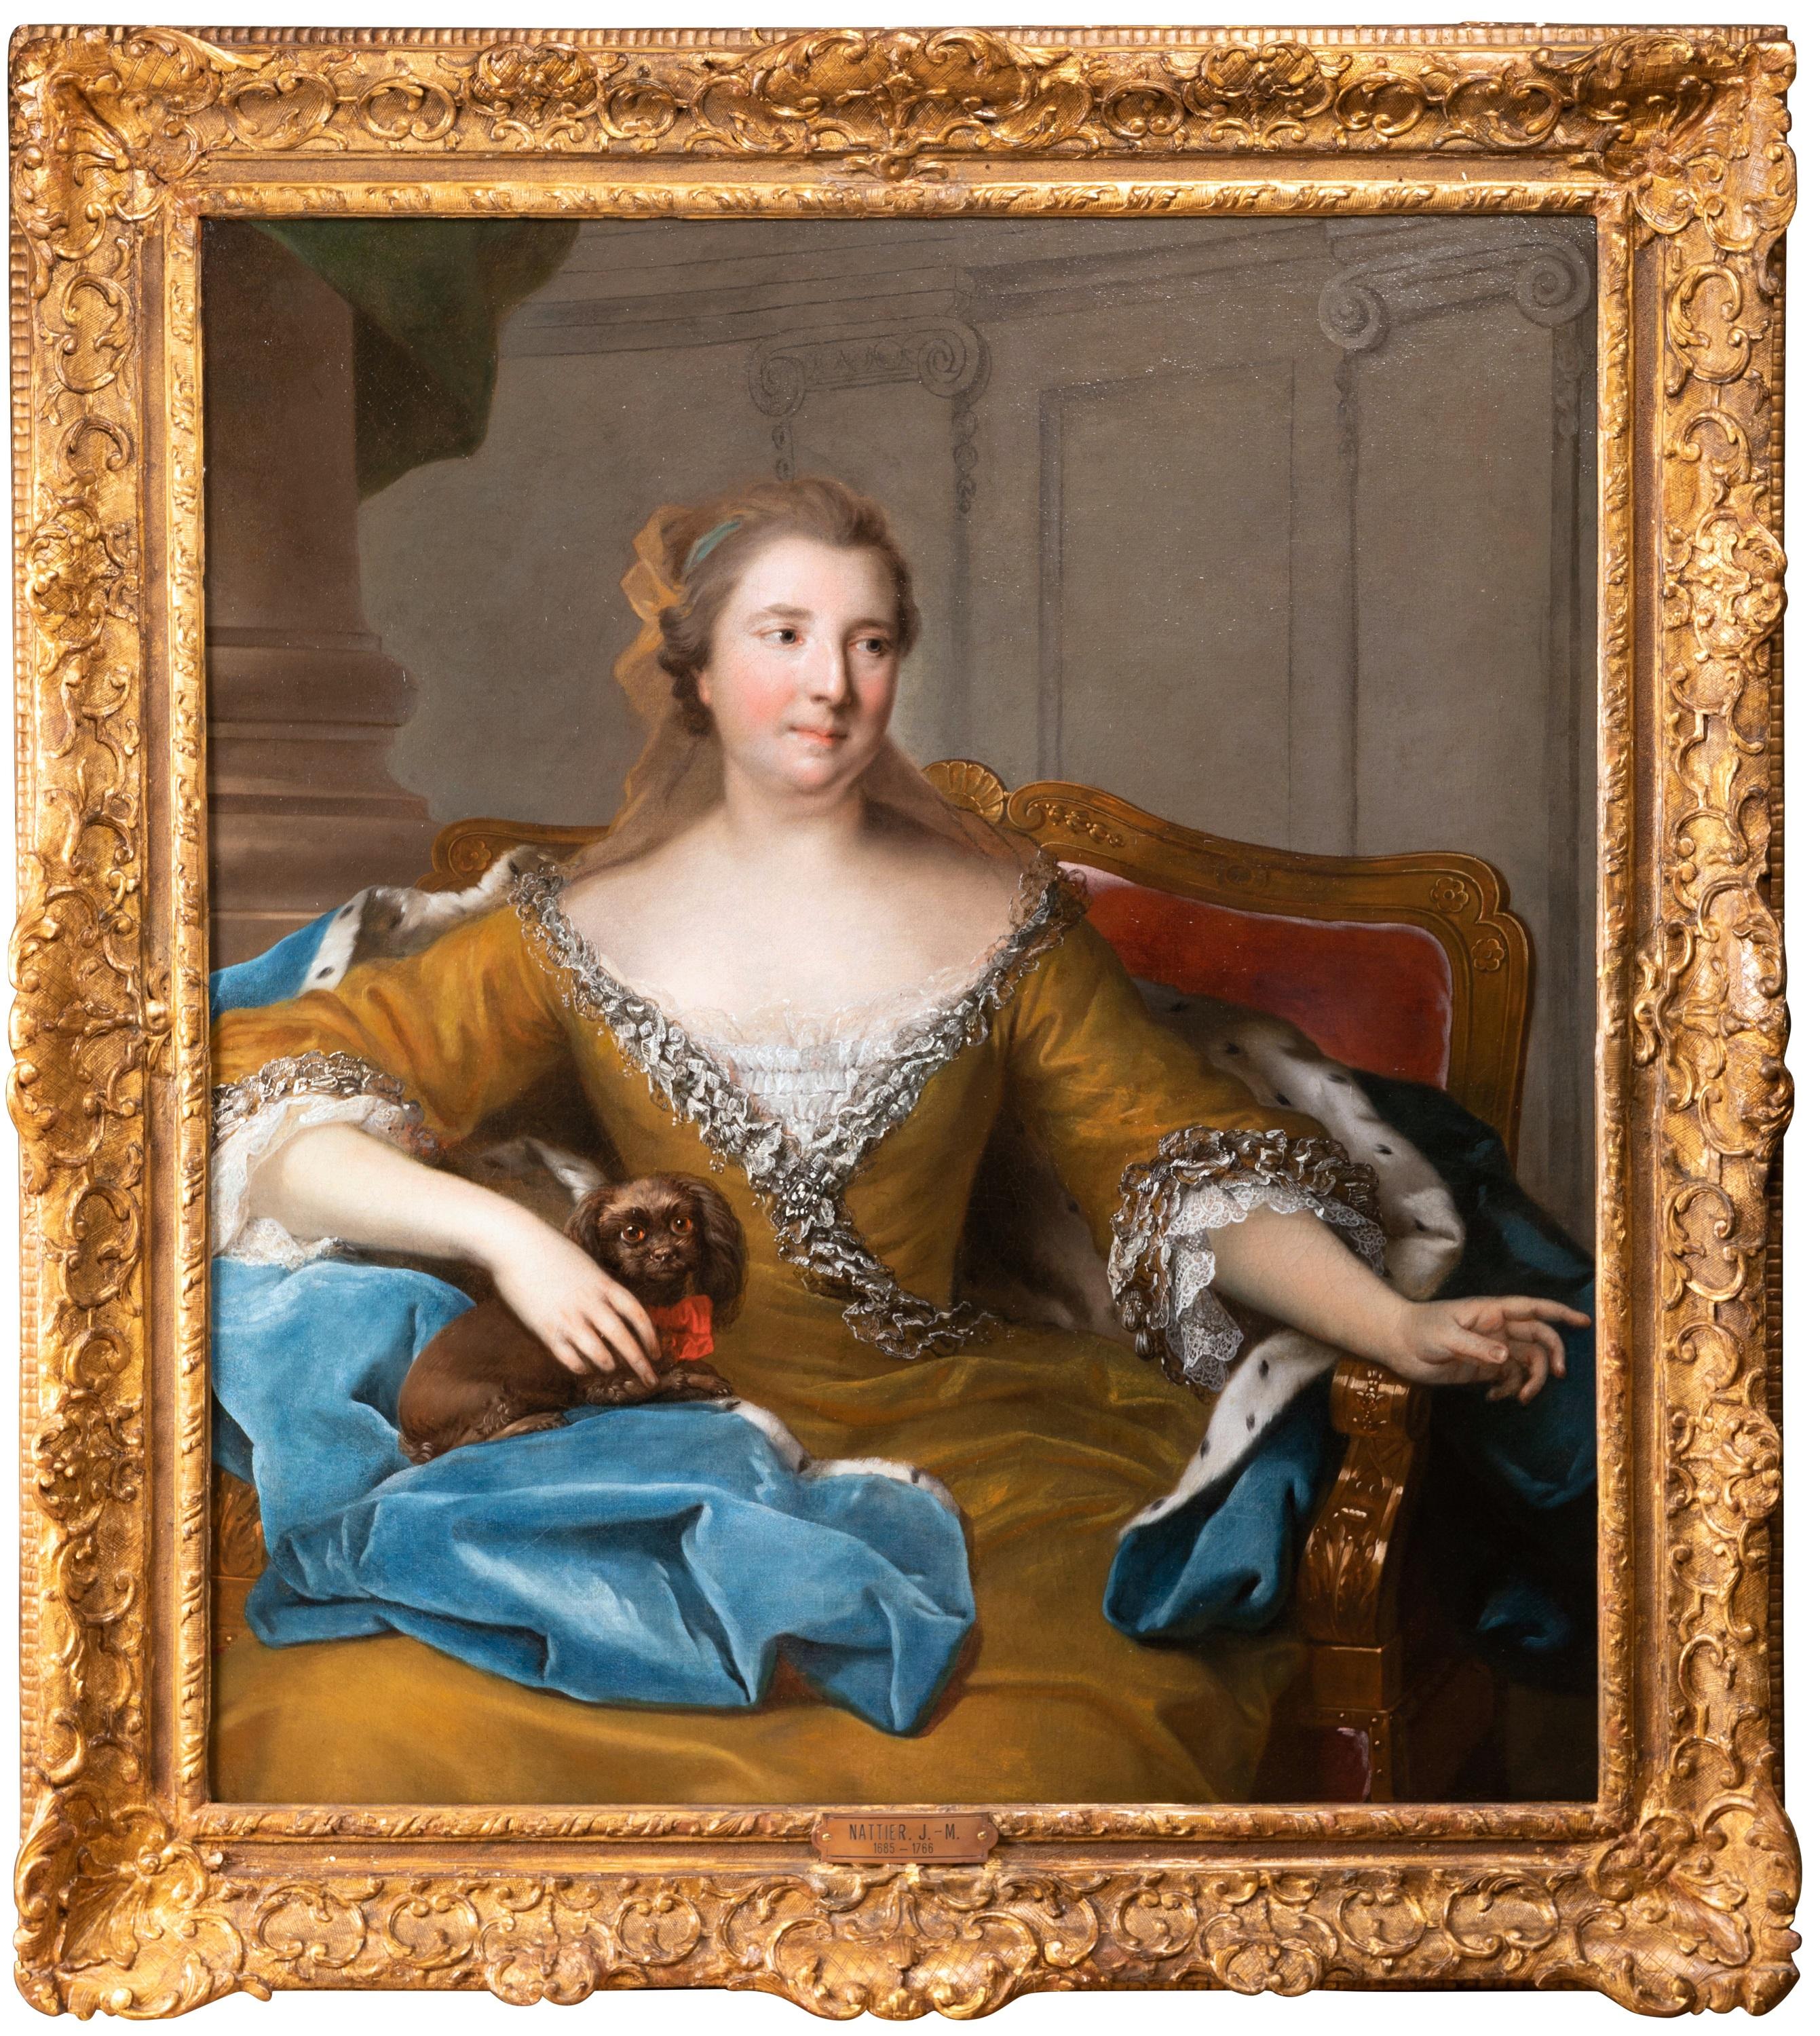 Jean-Marc Nattier (Paris, 1685 - 1766) and his workshop

Portrait of Charlotte de Hesse-Rheinfels

Oil on canvas : h. 44.09 in, w. 38.19 in

18th century carved giltwood framed

 Framed : h. 52.36 in, w. 47.63 in

Charlotte de Hesse-Rheinfels